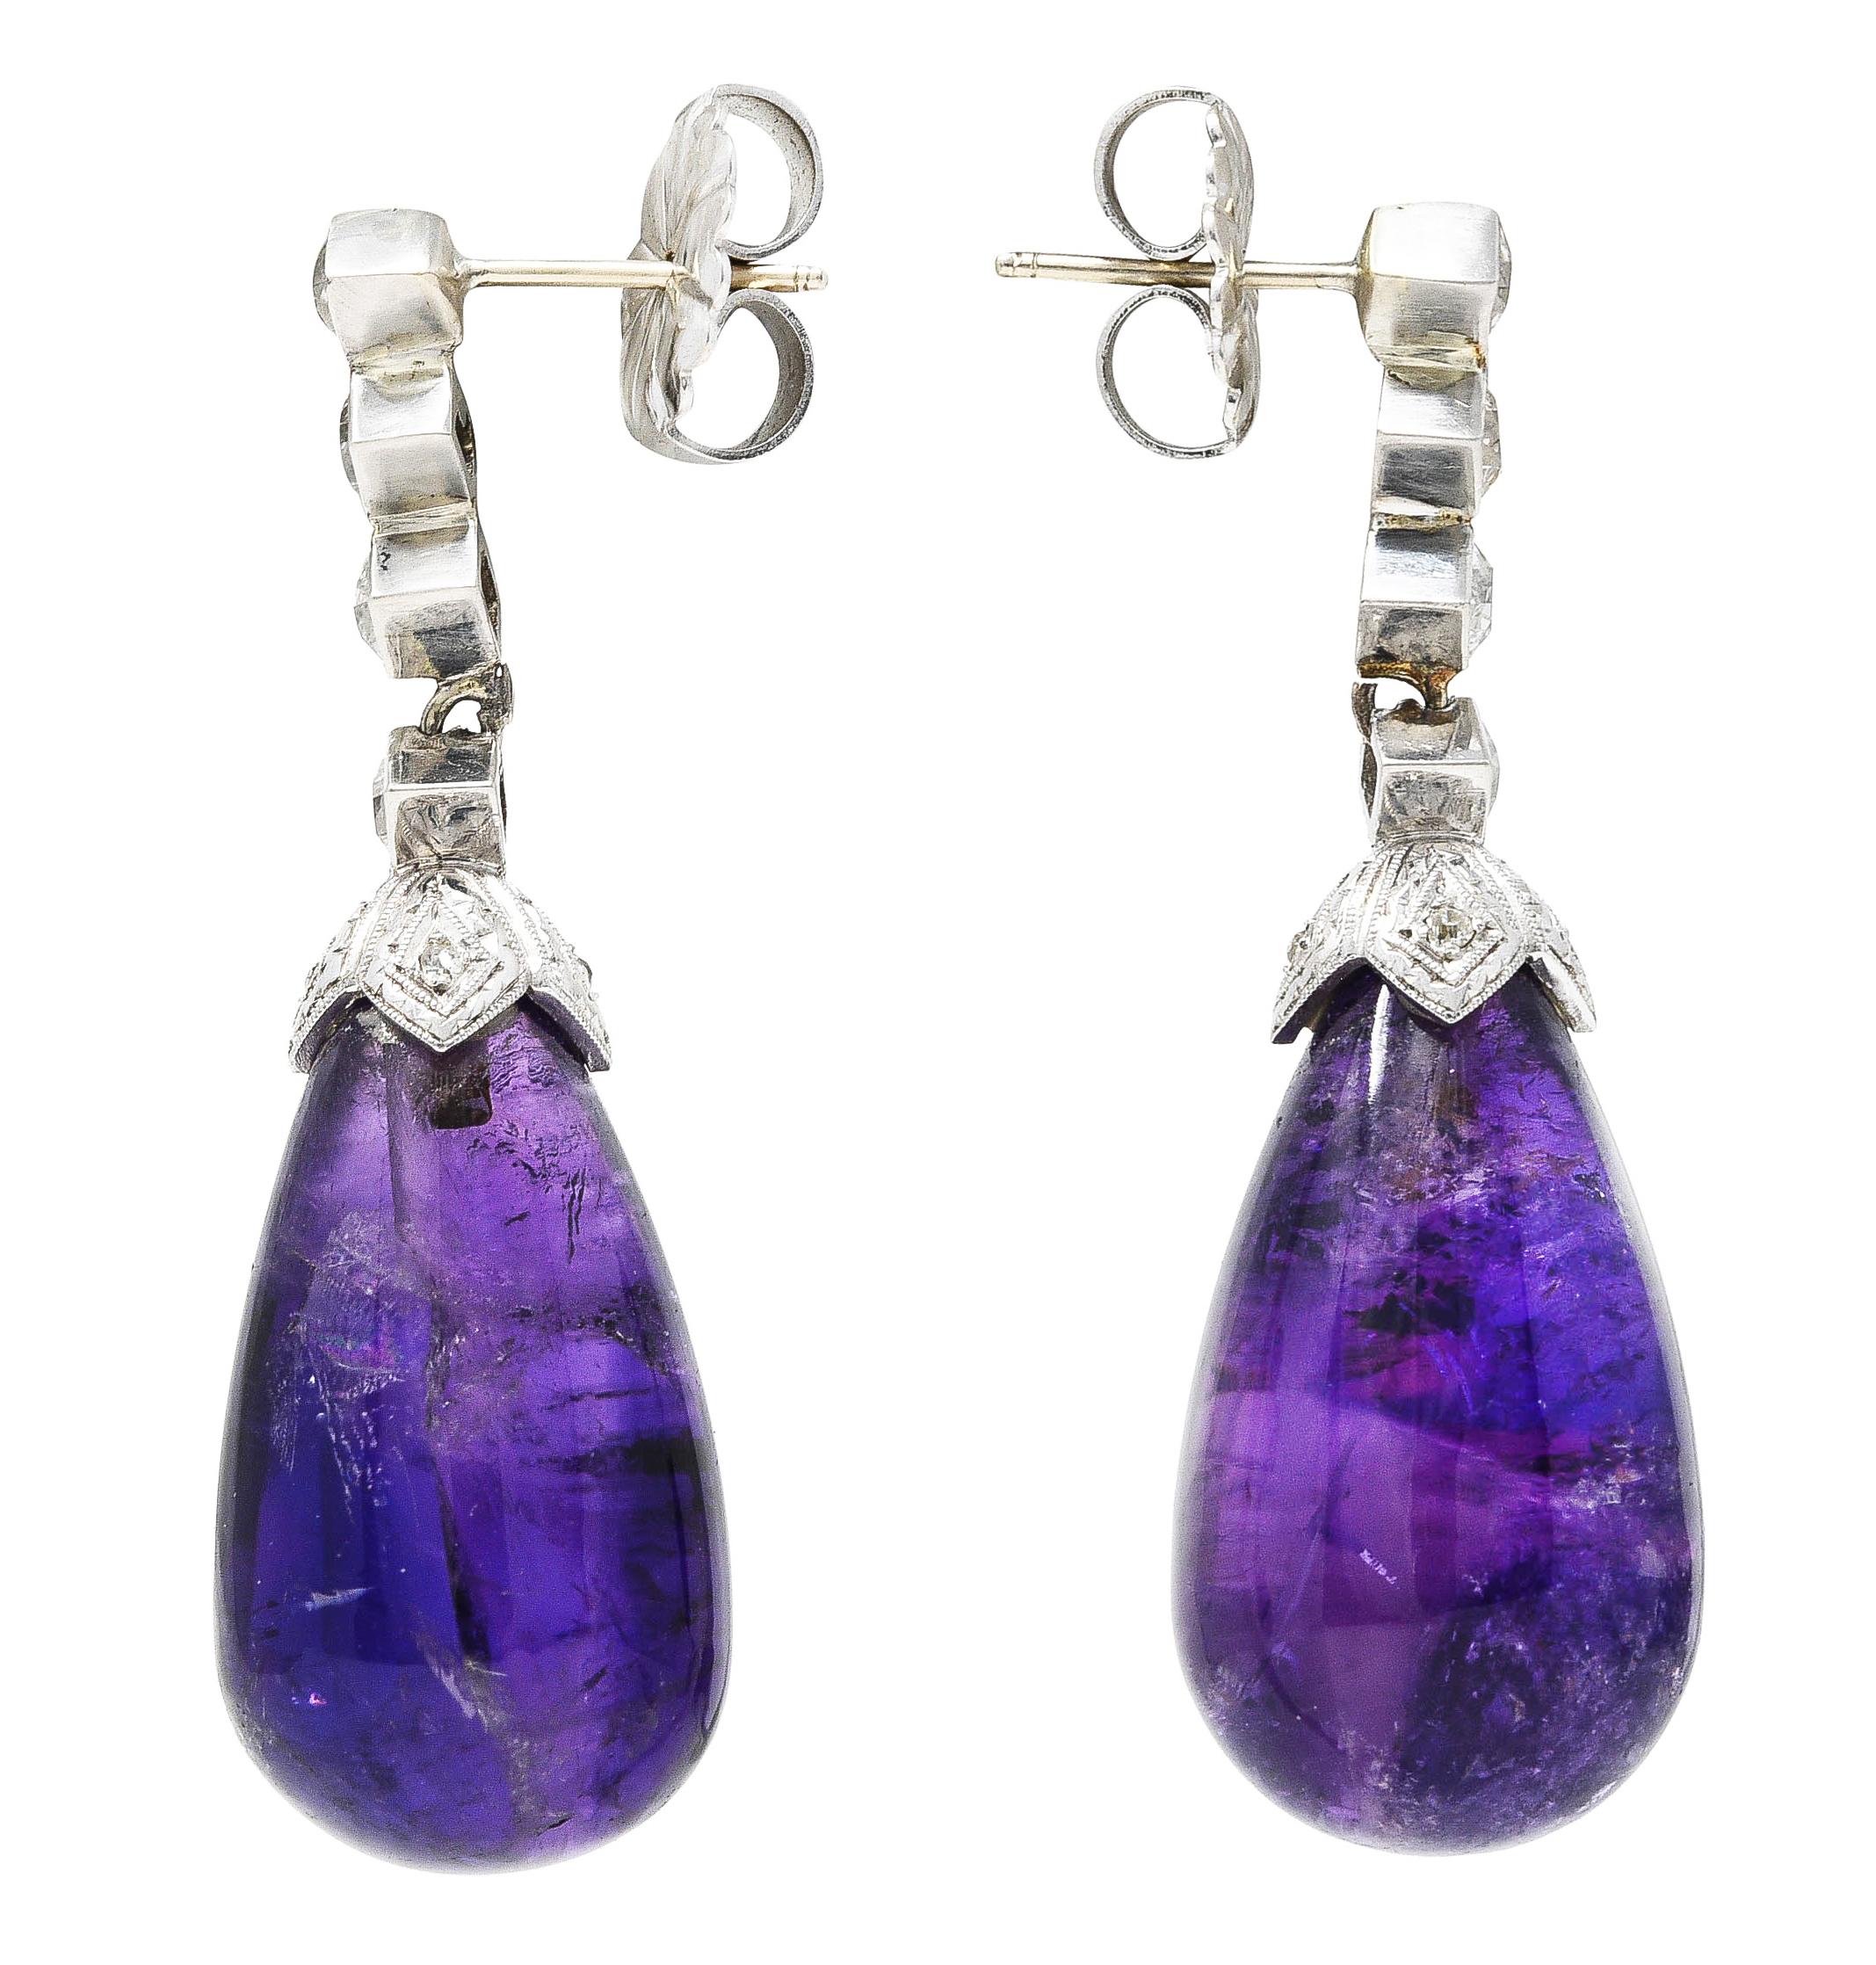 Earring surmounts are designed as hand fabricated navette forms. Kite set with French cut diamonds with G/H color and VS2 to SI1 clarity. Suspending substantial amethyst pampel drops. Well matched in rich purple color and semi-transparent with